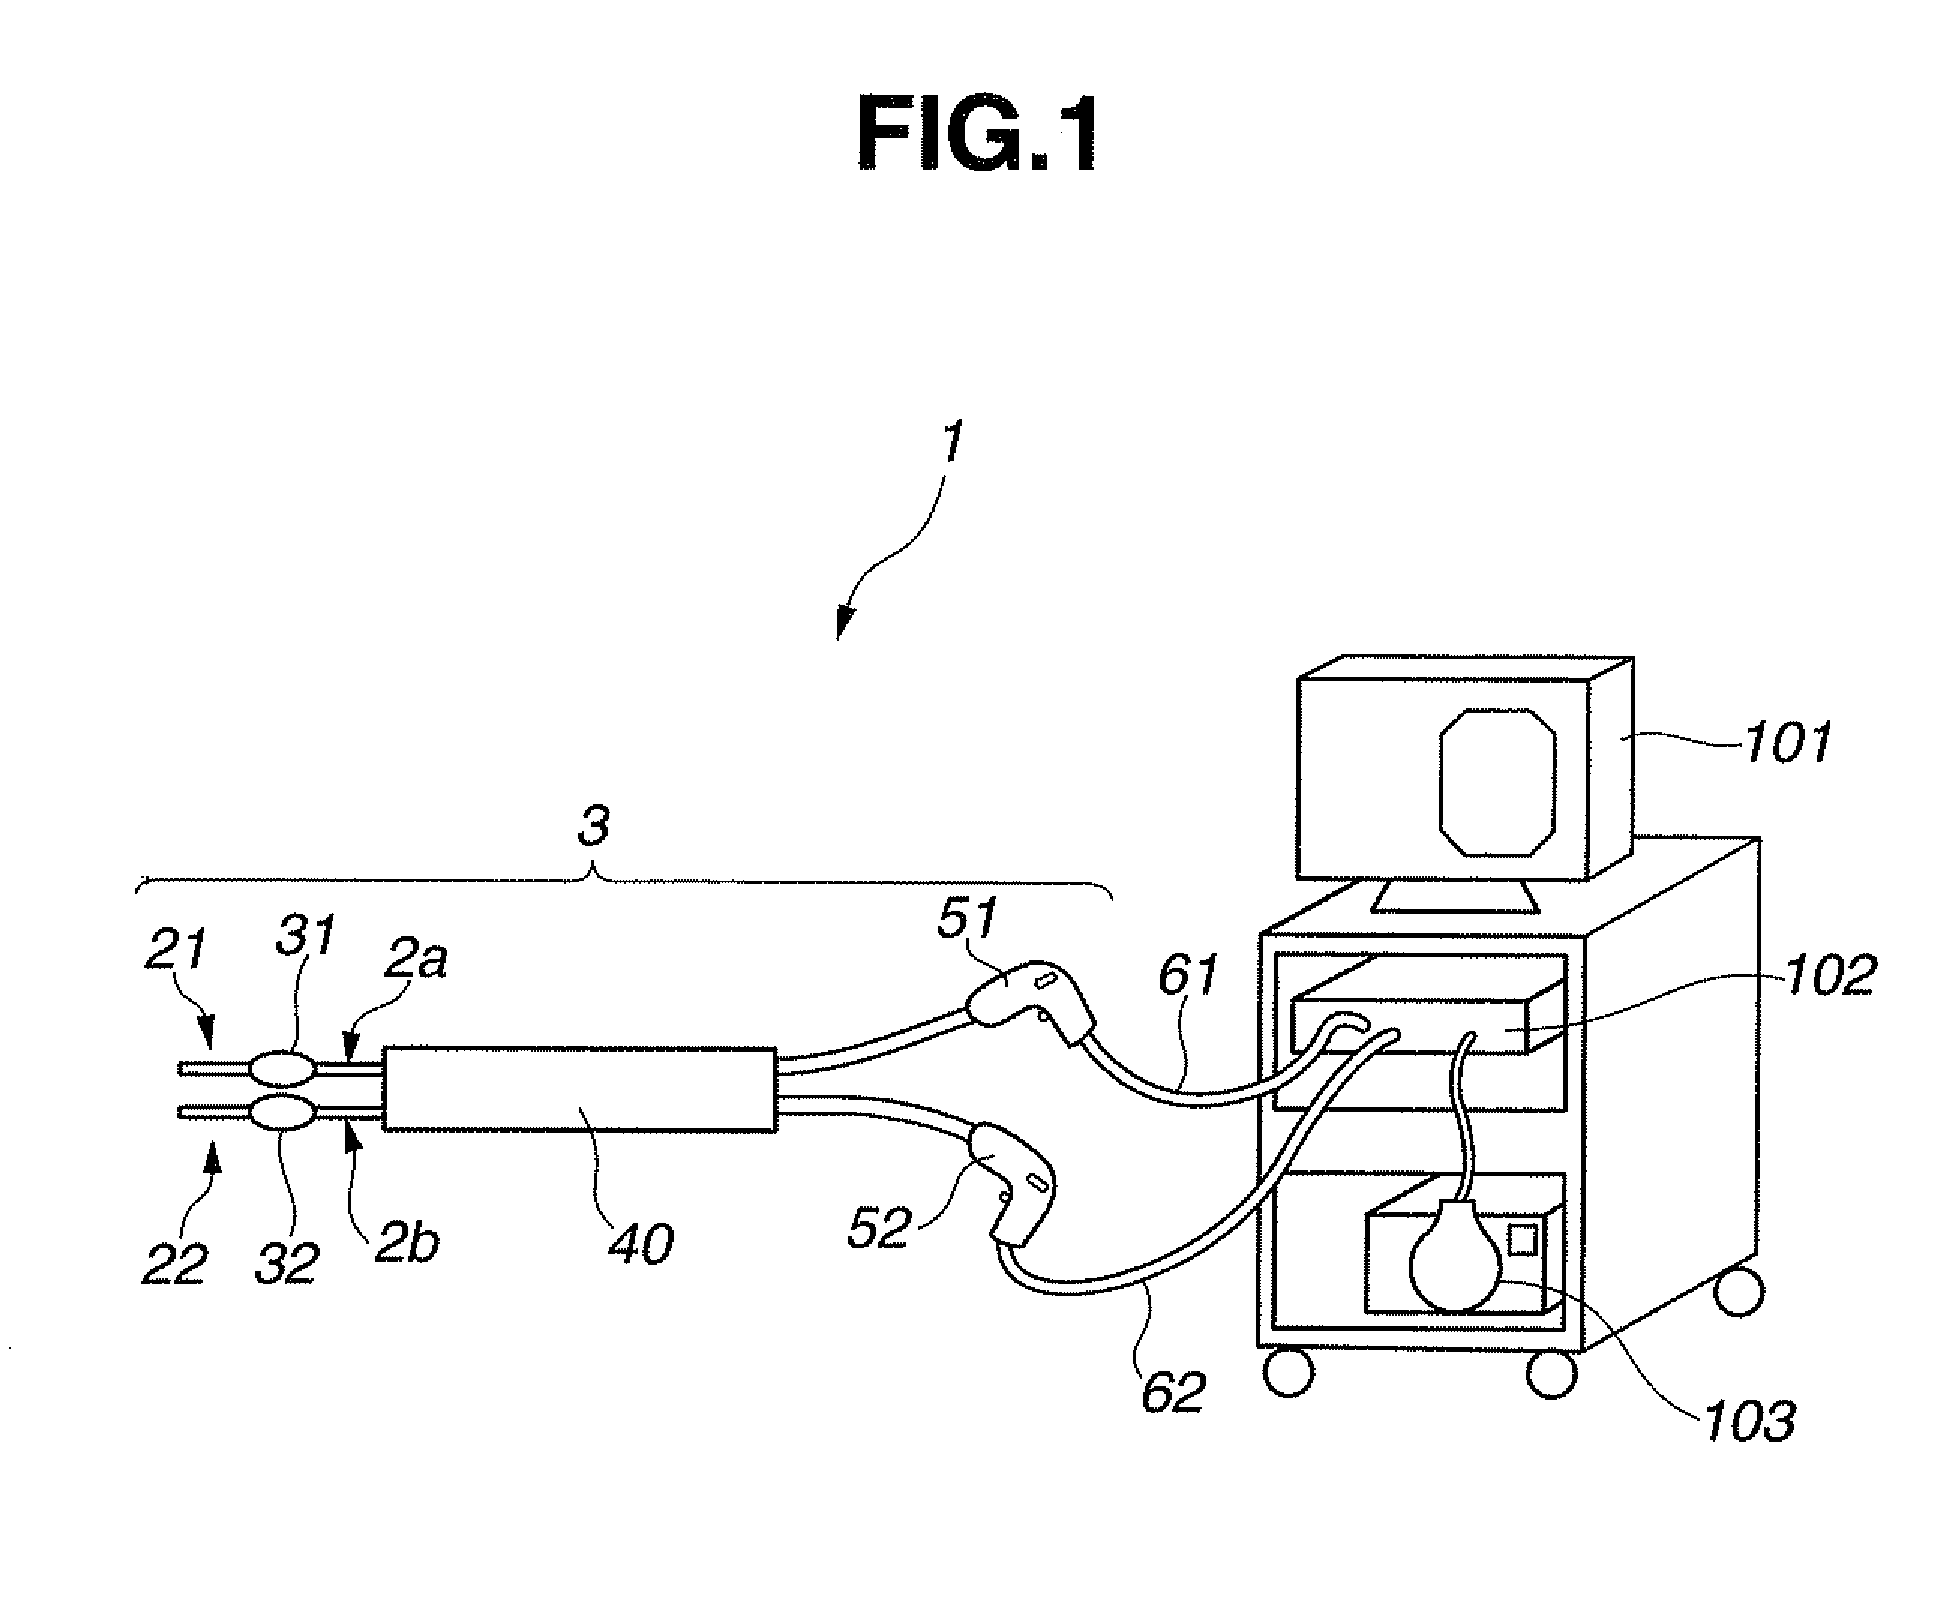 Apparatus for advancing an endoscope and method for manipulating the apparatus for advancing an endoscope